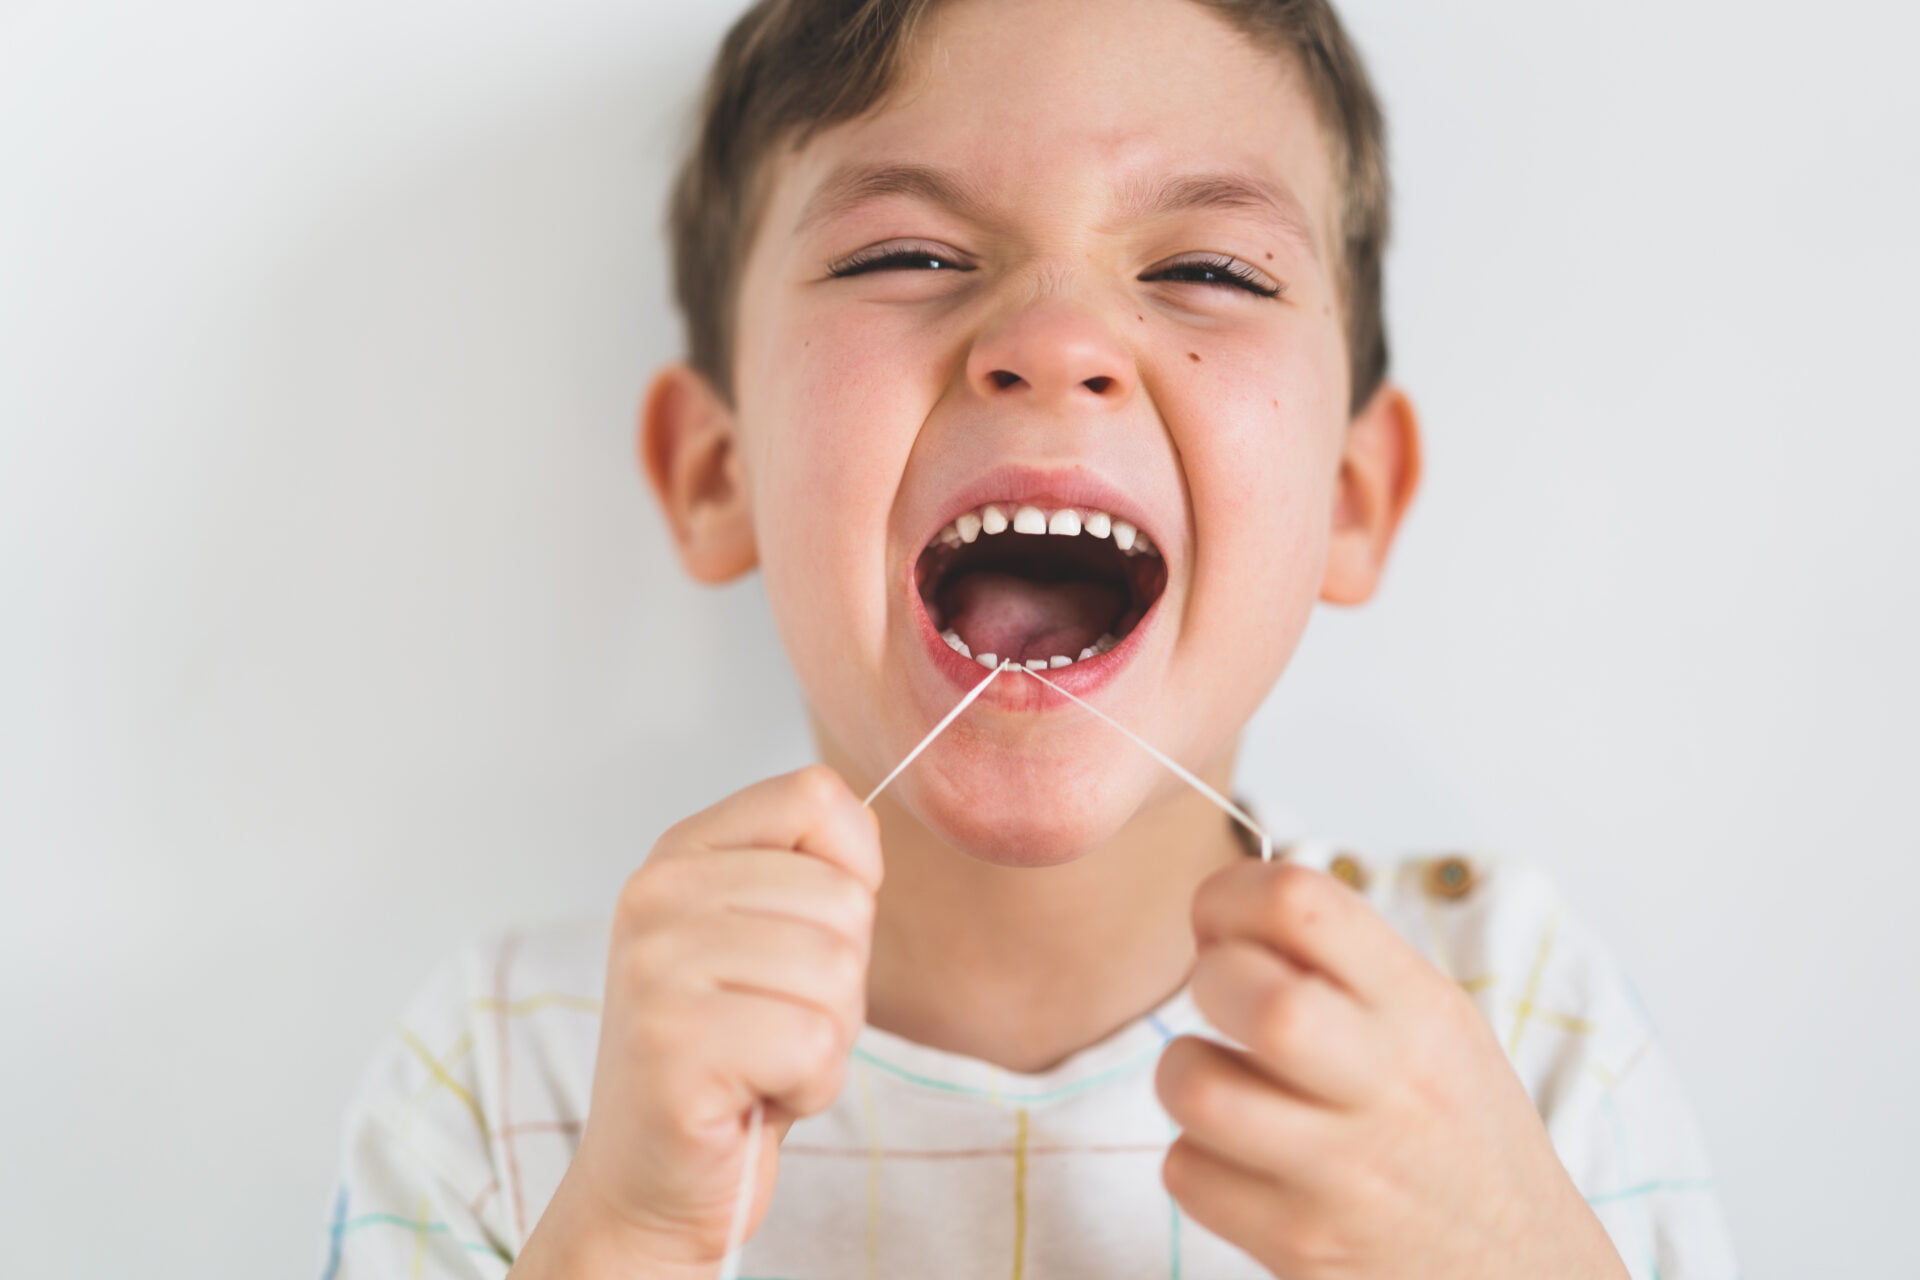 Cute boy pulling loose tooth using a dental floss. The boy's first milk tooth is loose. Toothache. Process of removing a baby tooth